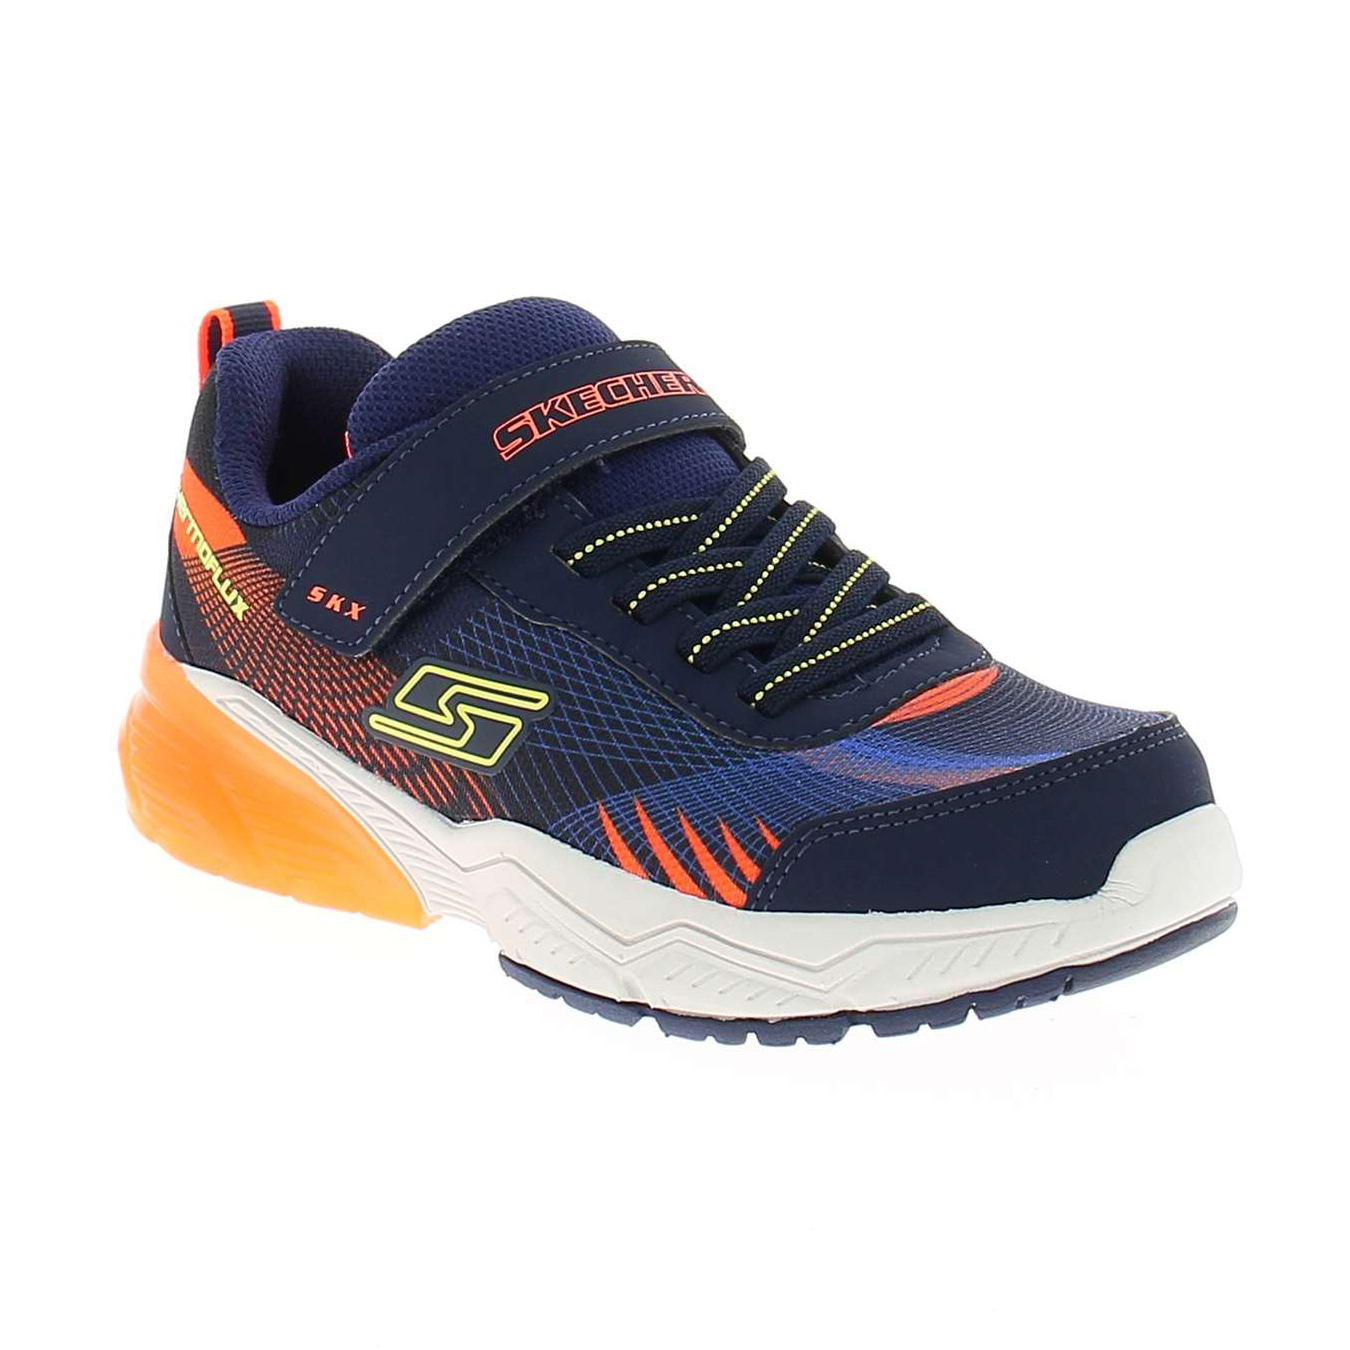 01 - THERMO FLUX - SKECHERS - Baskets - Textile